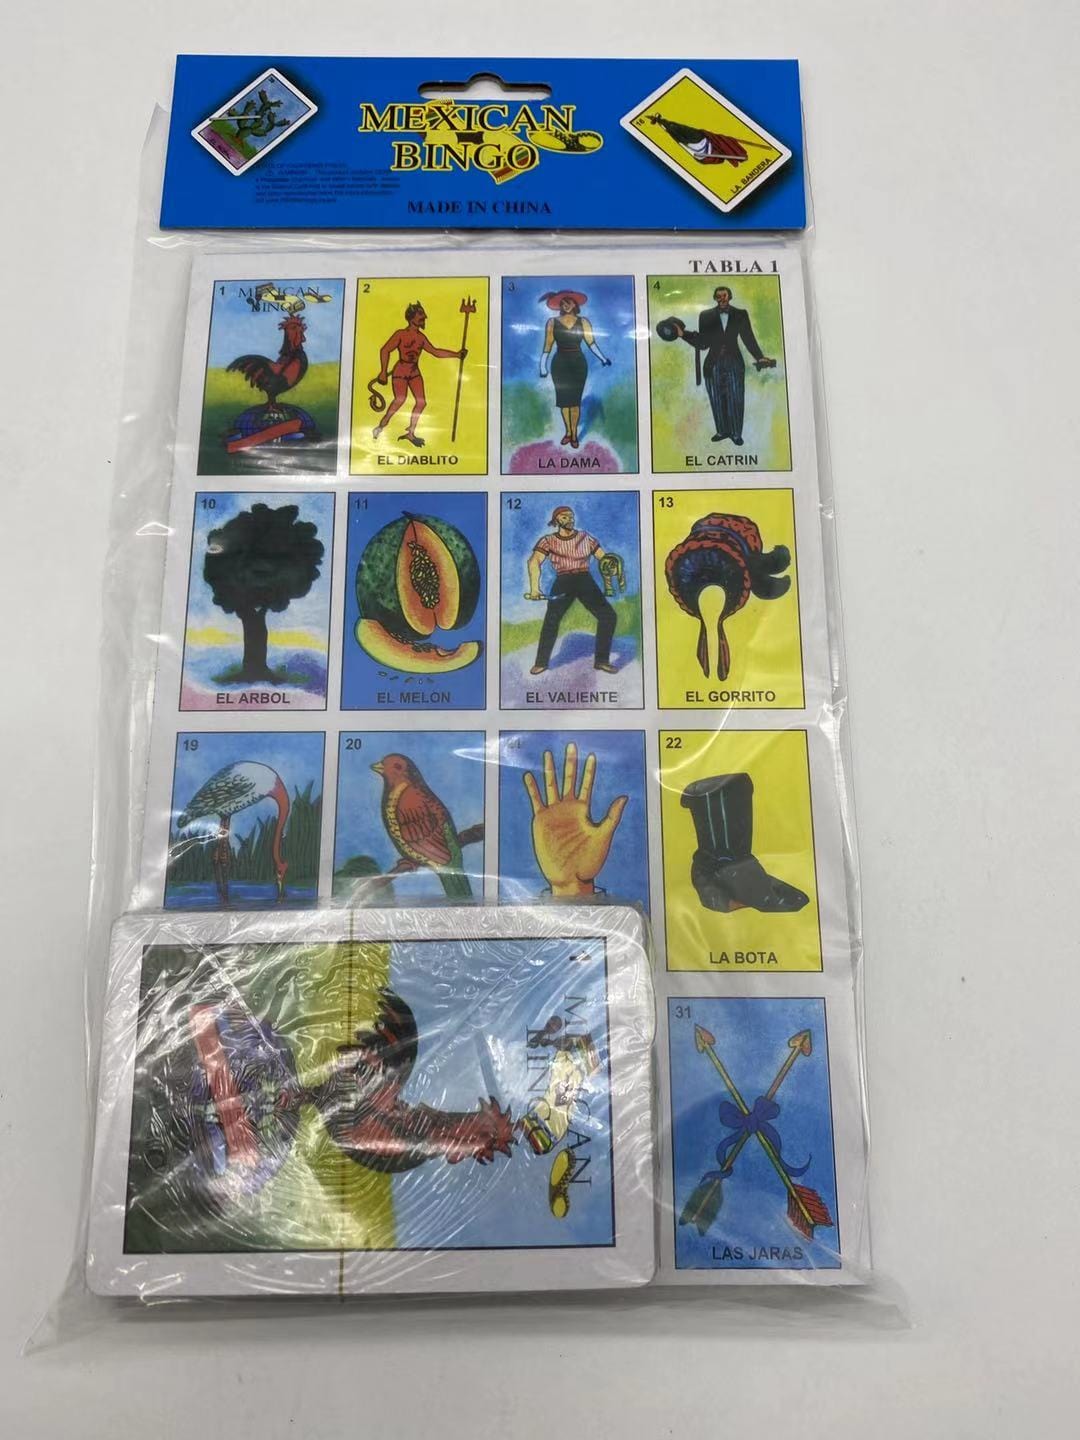 Google Doodle Today Celebrates Mexican Card Game Loteria